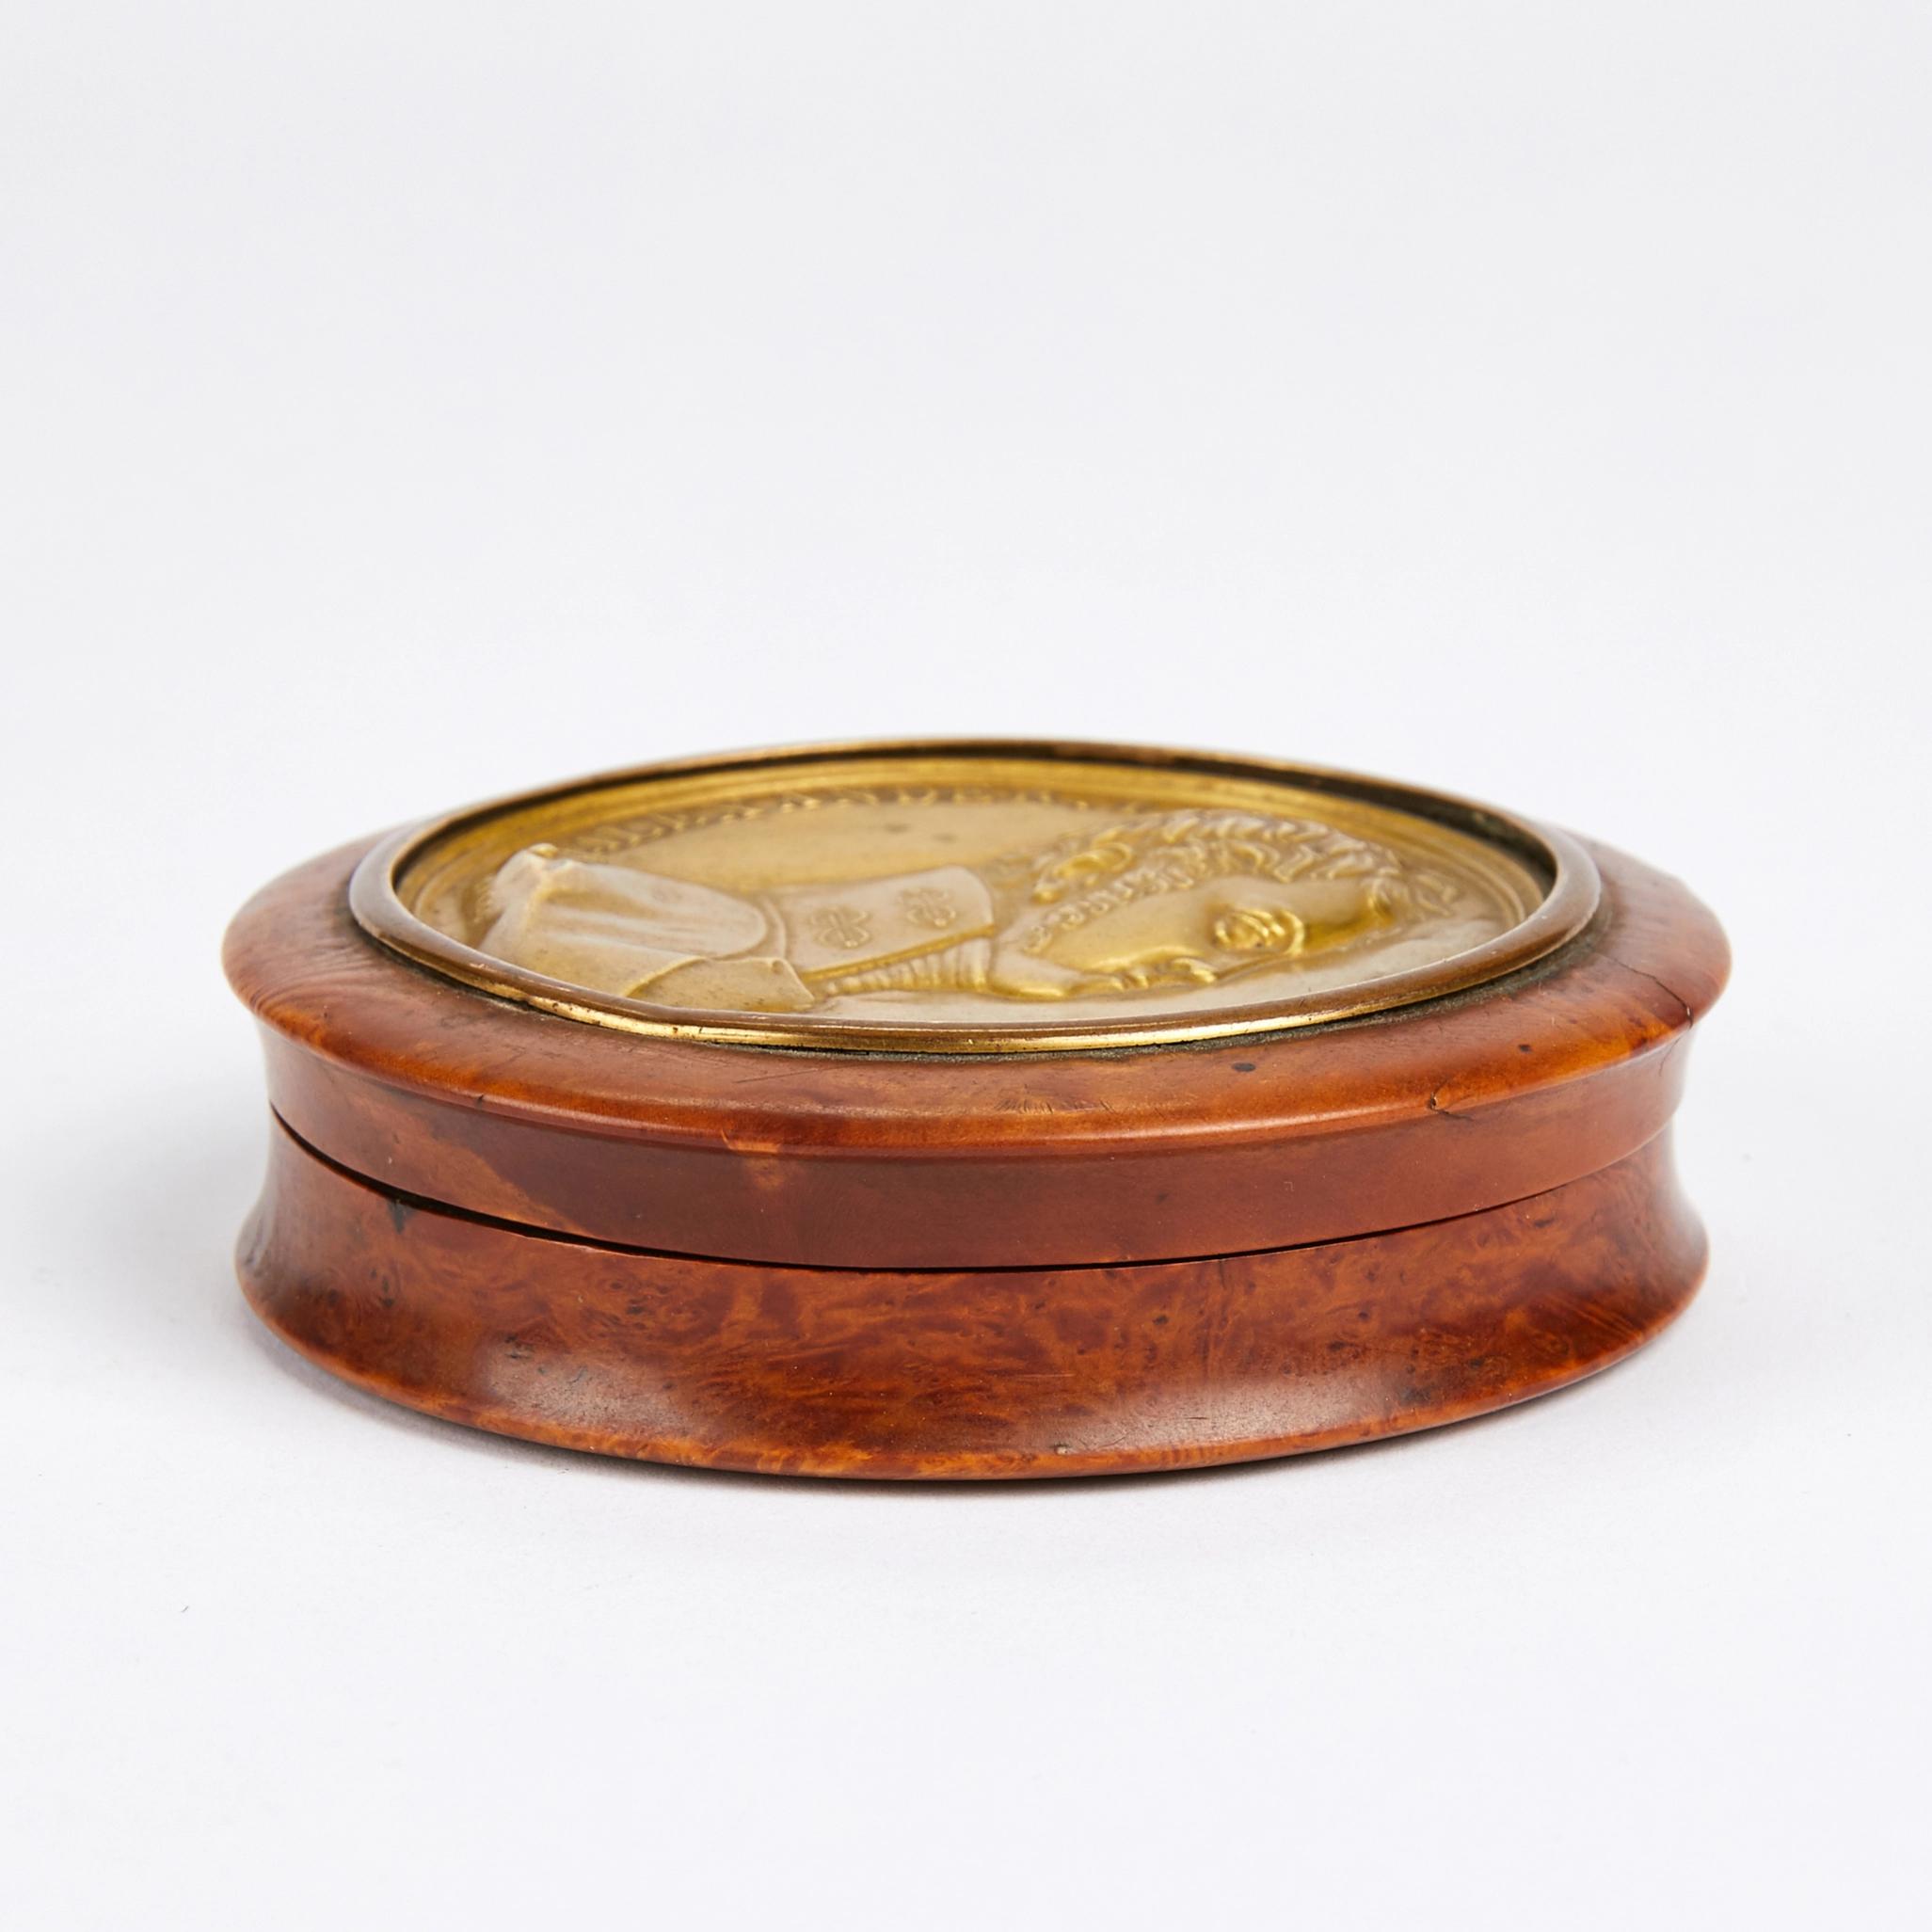 Snuff Box with Alexander I portrait - Image 3 of 5